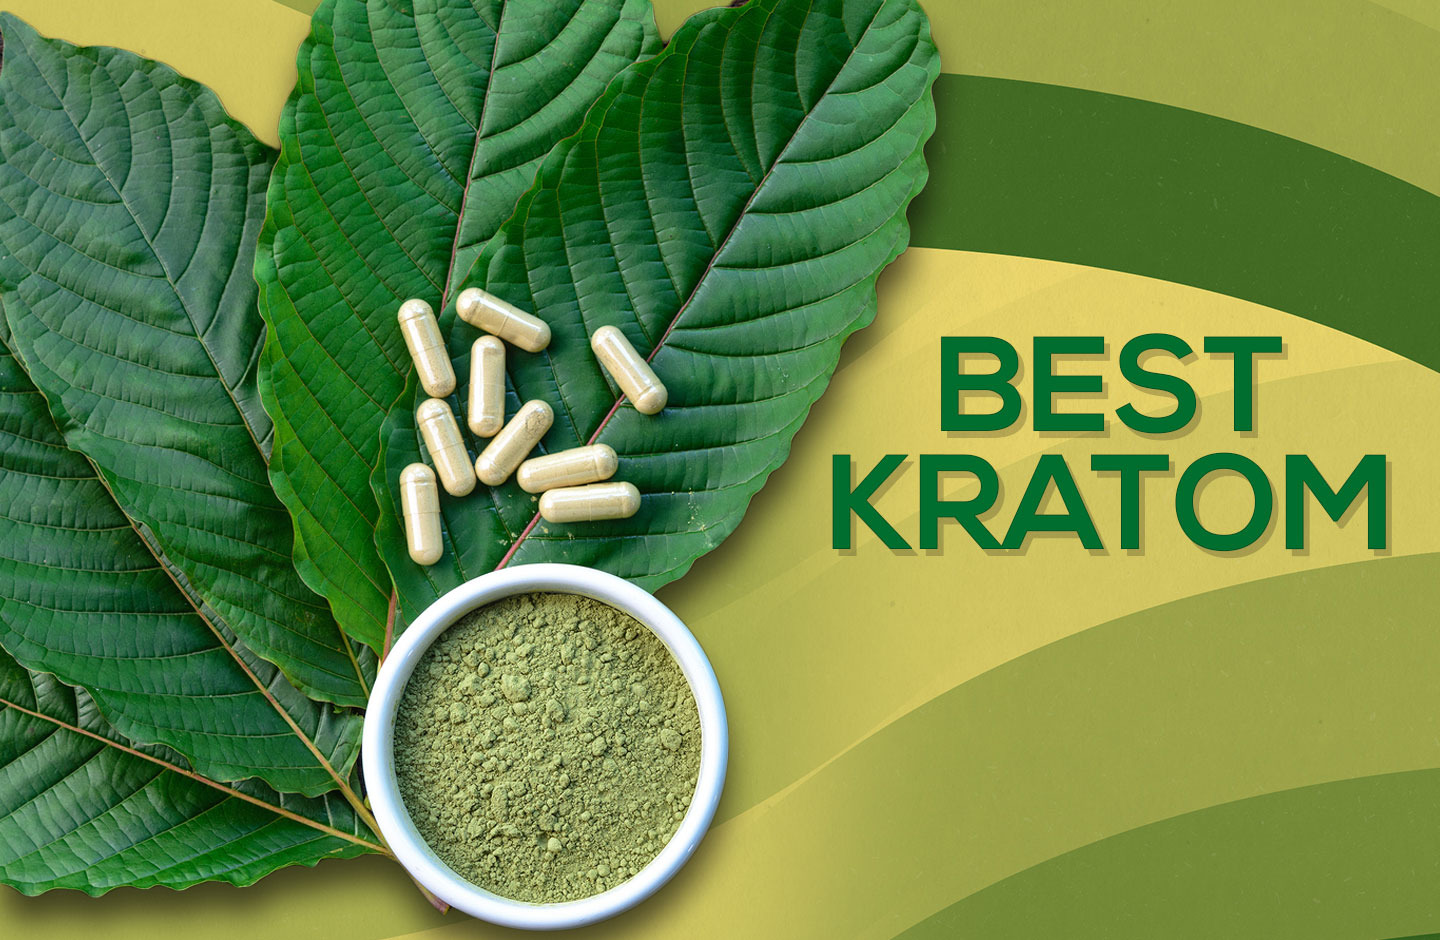 Which Kratom Extract Is the Best for You?